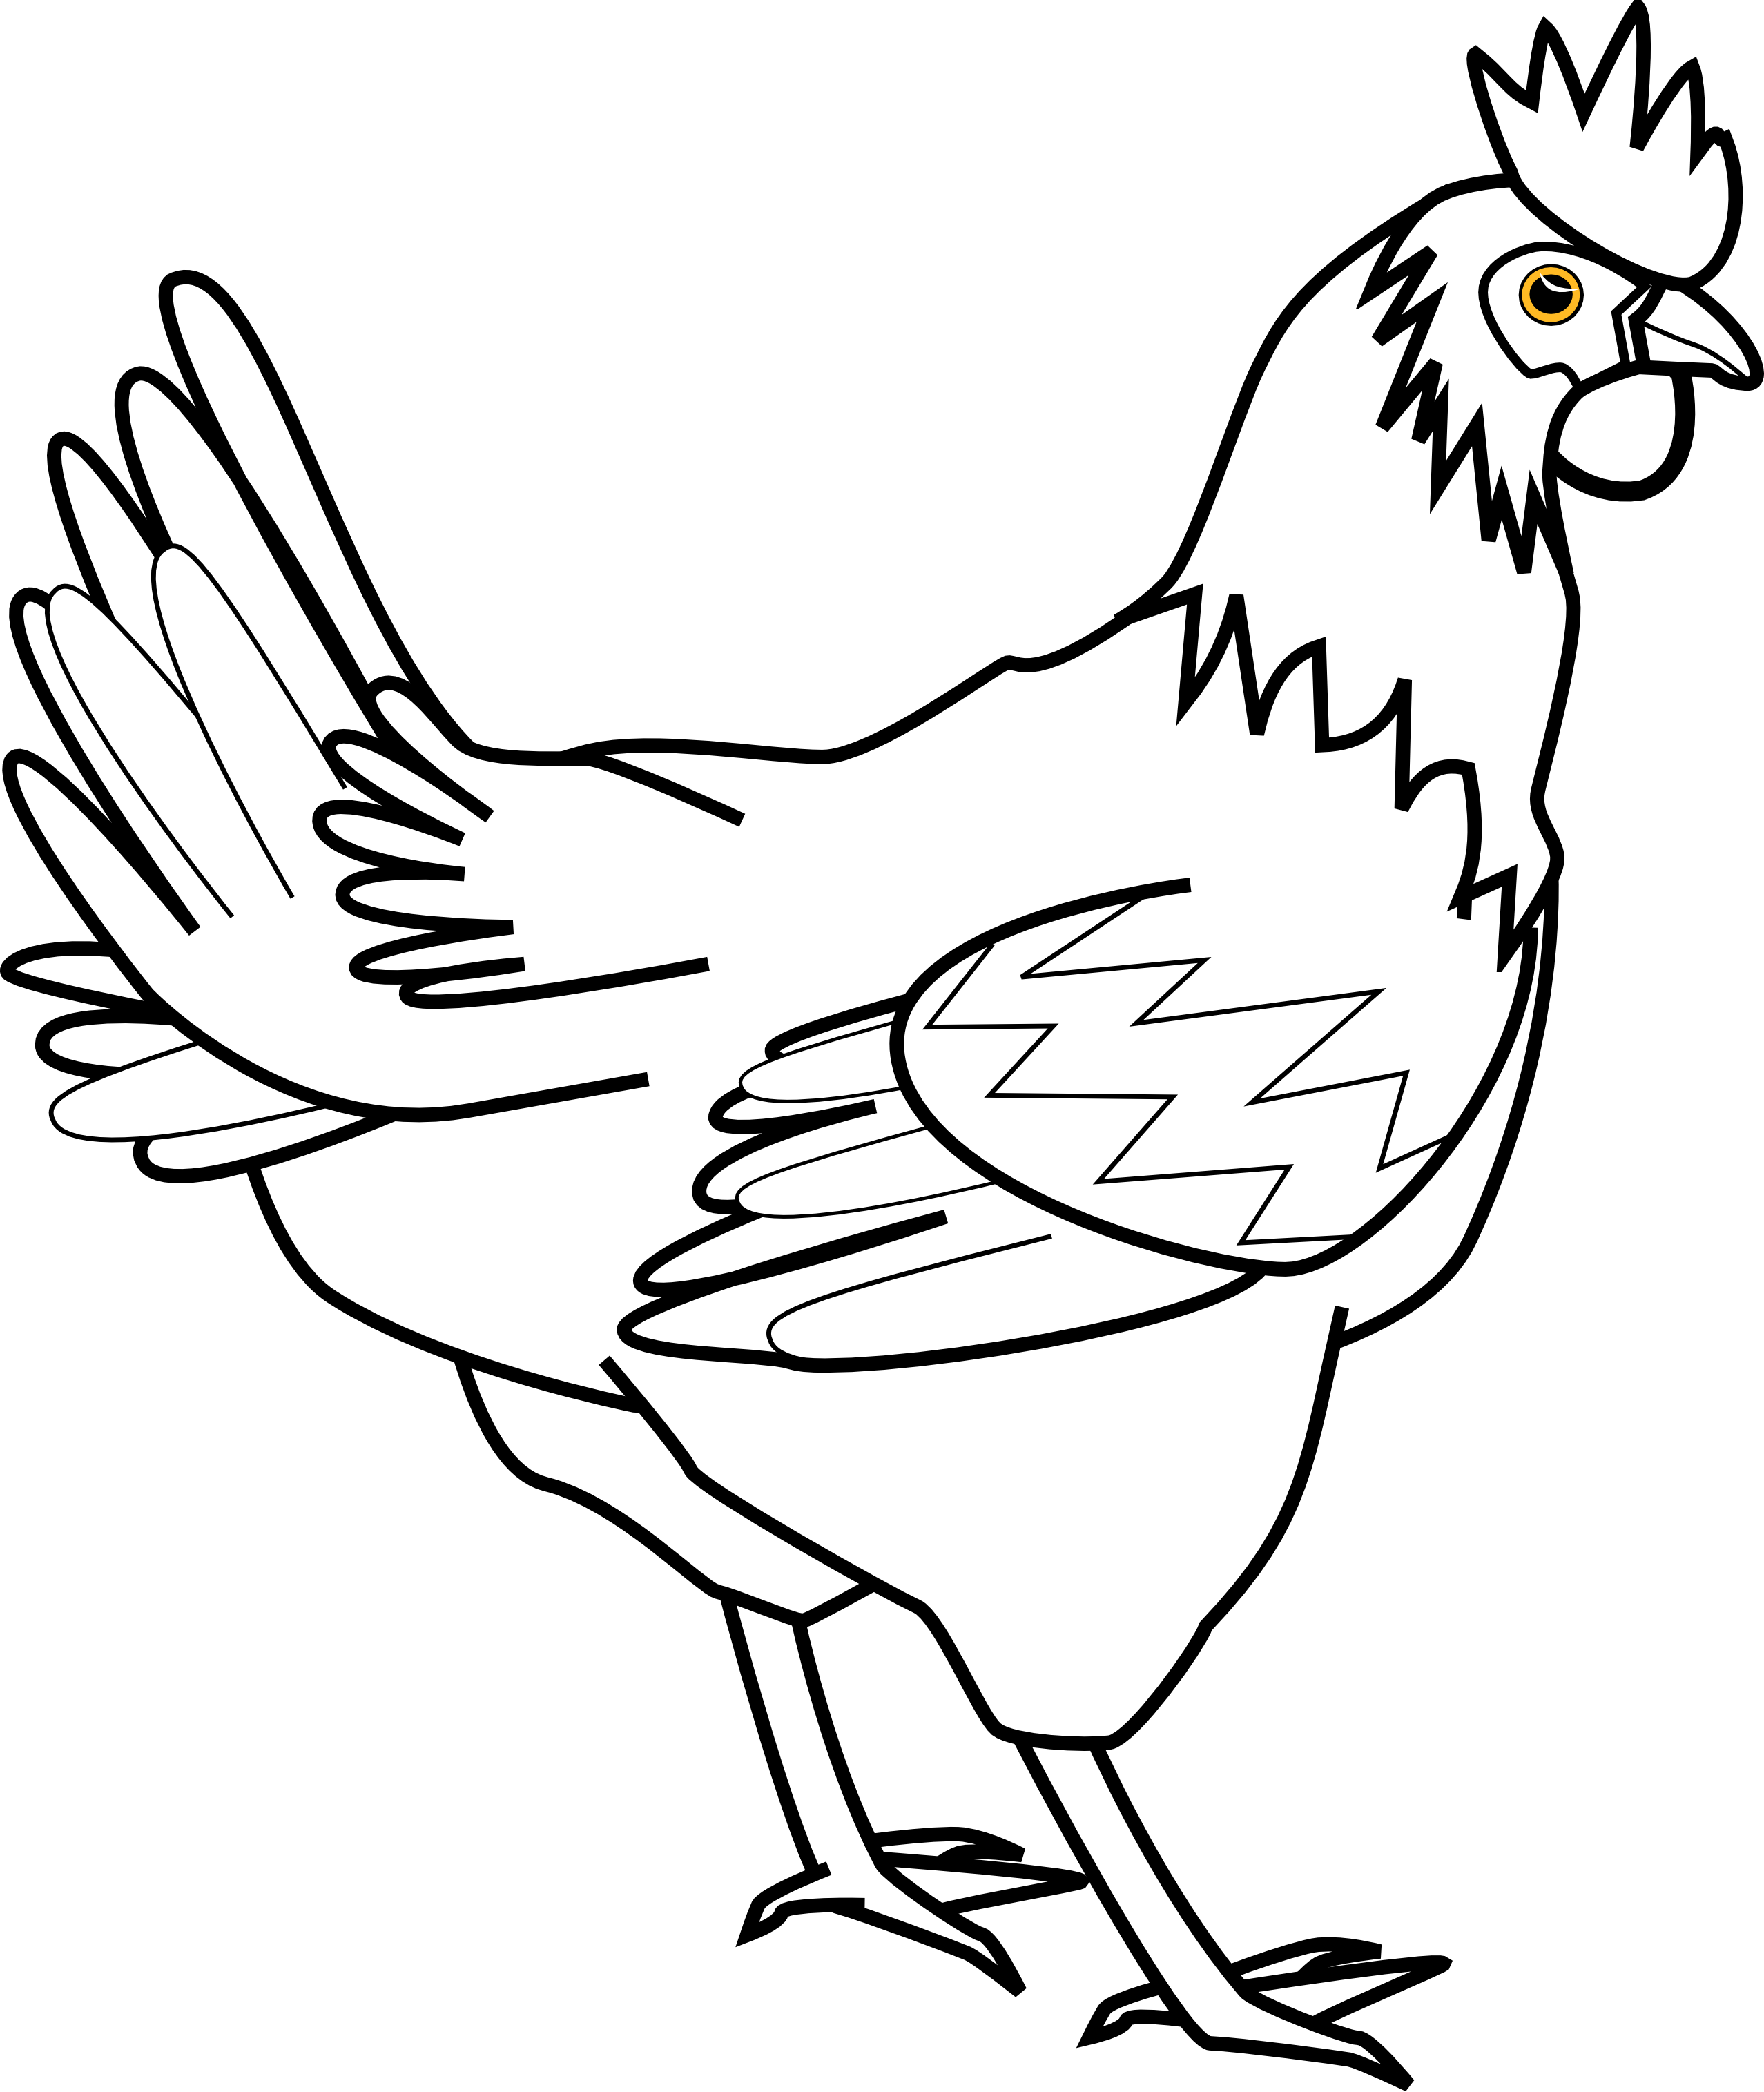 Black And White Clipart Image Of A Hen - ClipArt Best